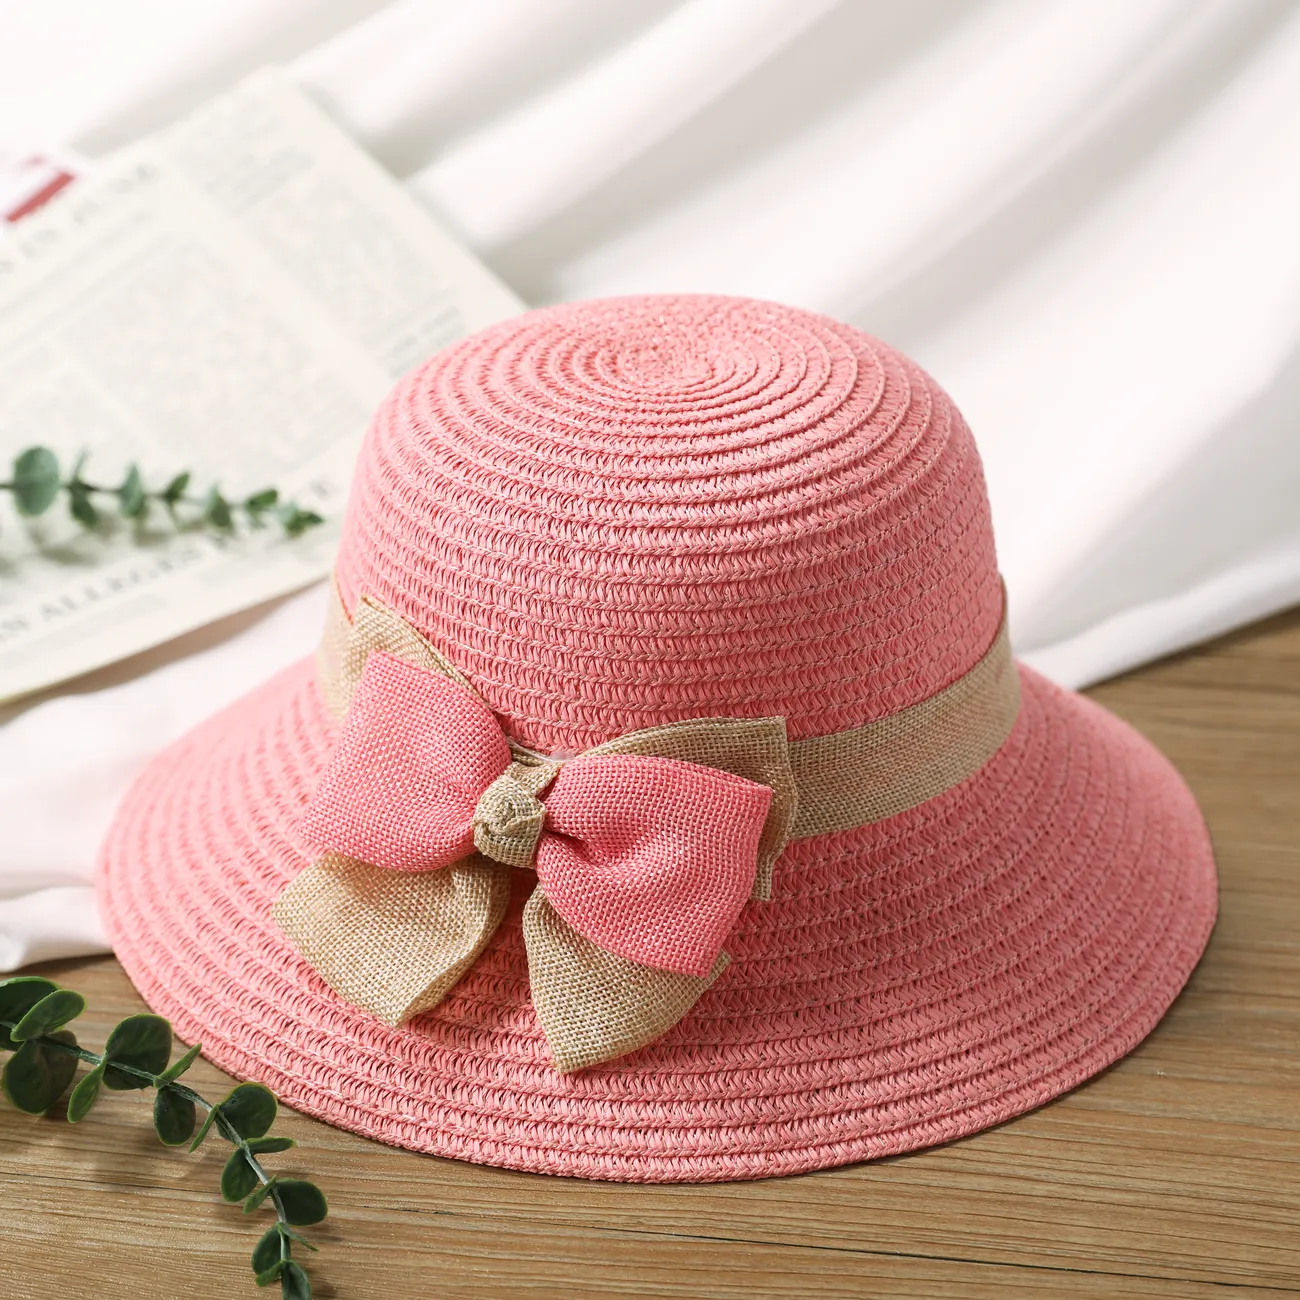 Summer Sun Hat for Girls with Bowknot and Rolled Brim, Straw Beach Hat for Travel and Vacation Pink big image 1